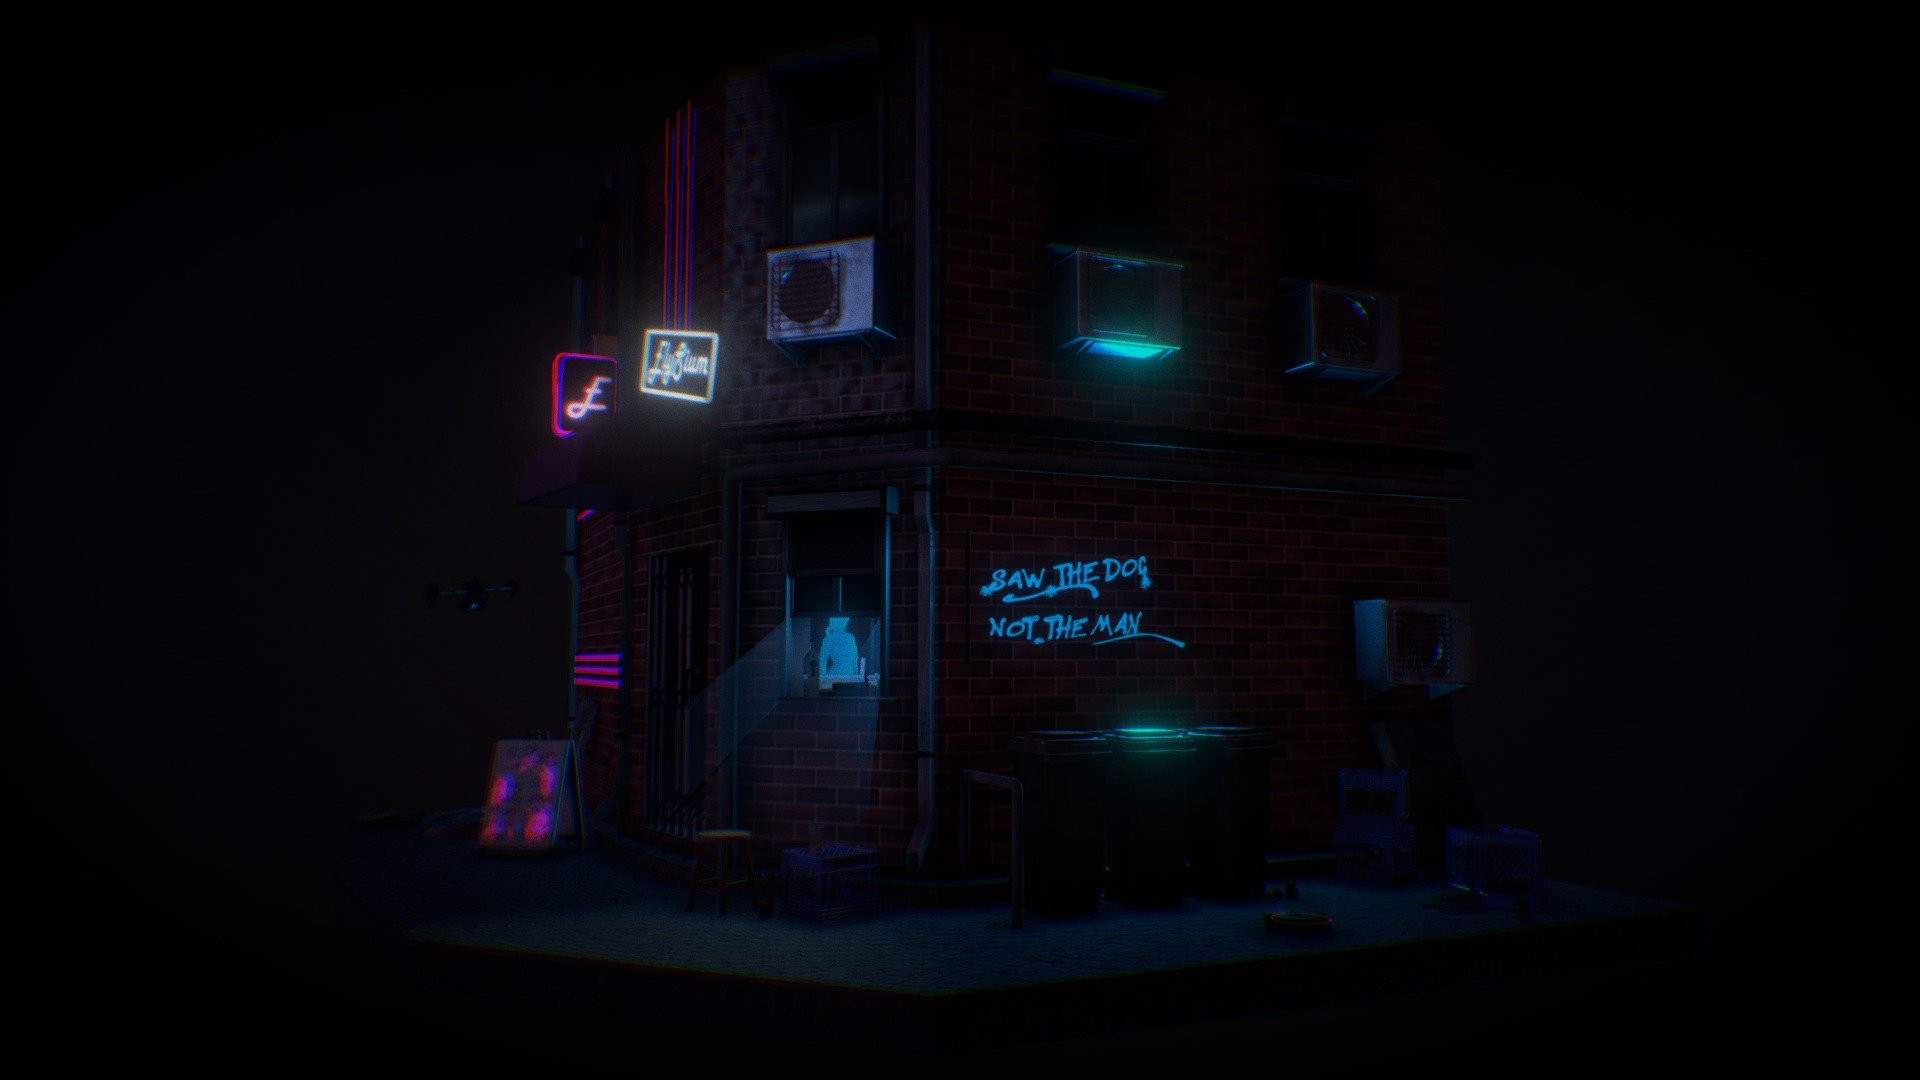 A small exterior Bar scene at night. A short 3 week environment assessment made using Maya, Substance Painter and Designer and Zbrush for the character model (Character model rig and animation from Mixamo).
This environment assessment may have been overscoped for a 3 week project, but i'm glad i finished it for now with some more experience on deadlines and scope 3d model